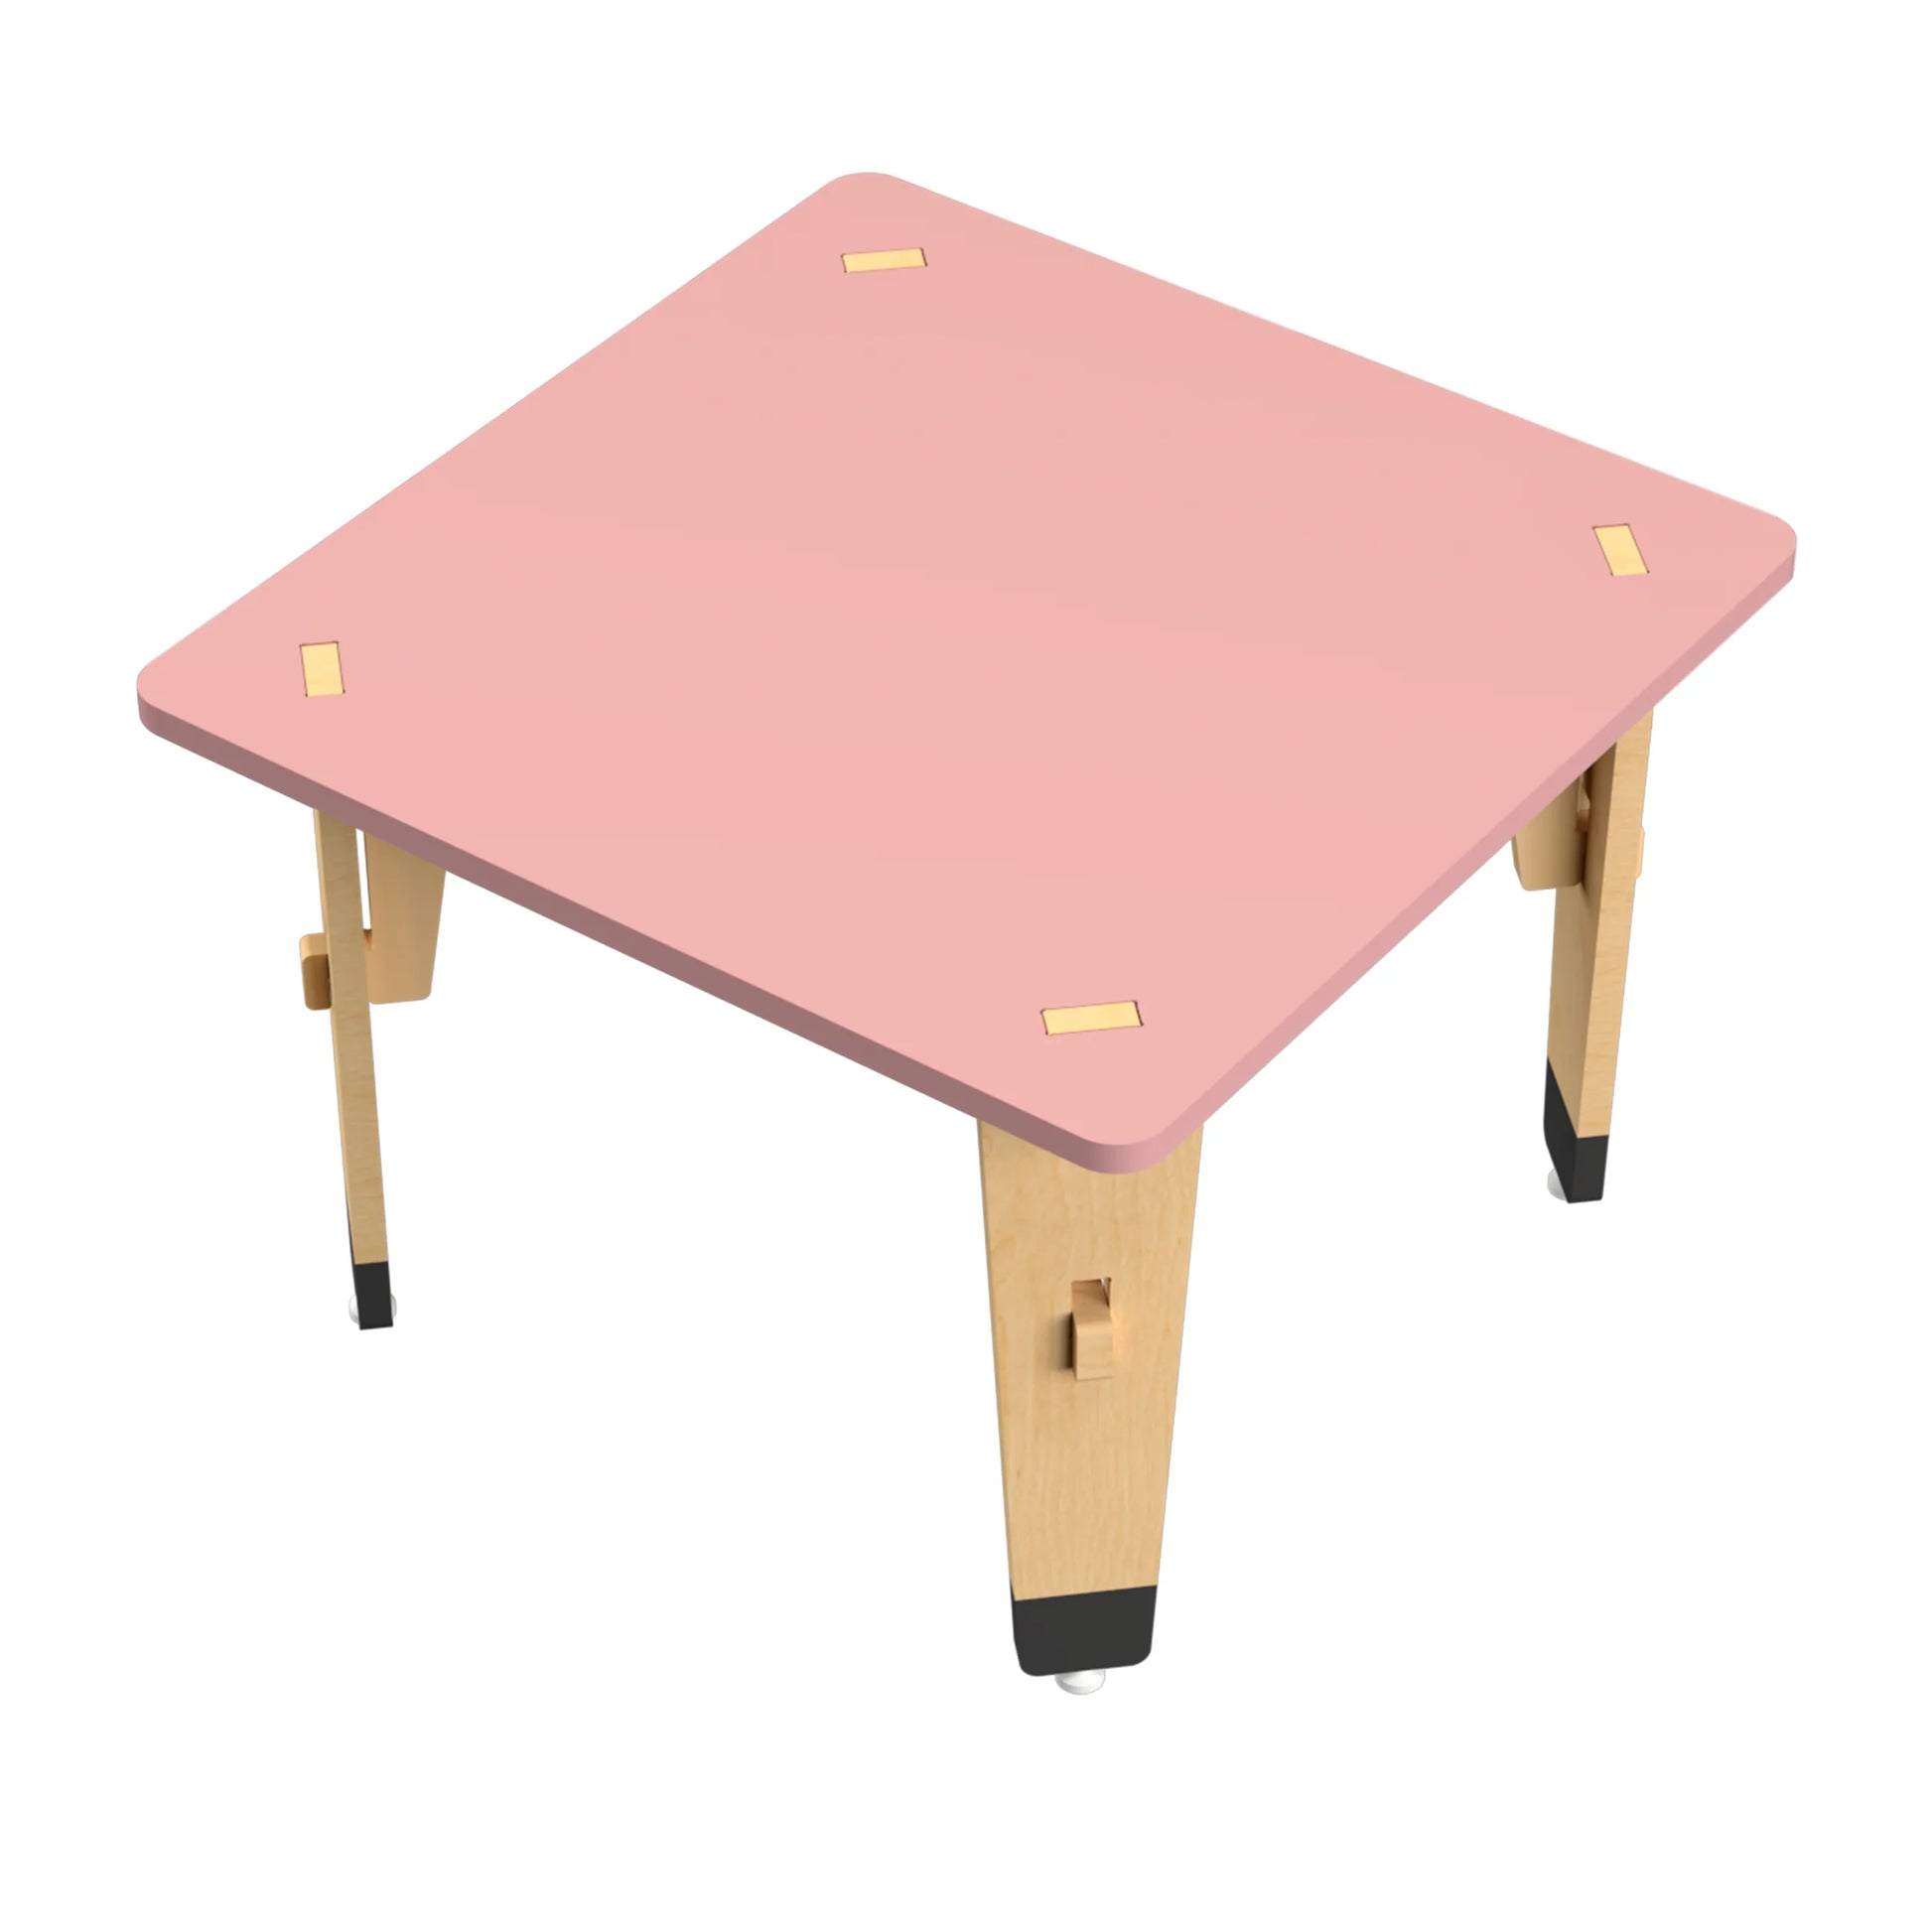 Buy Lime Fig Wooden Table - Pink (15 Inches) - Upper View - SkilloToys.com